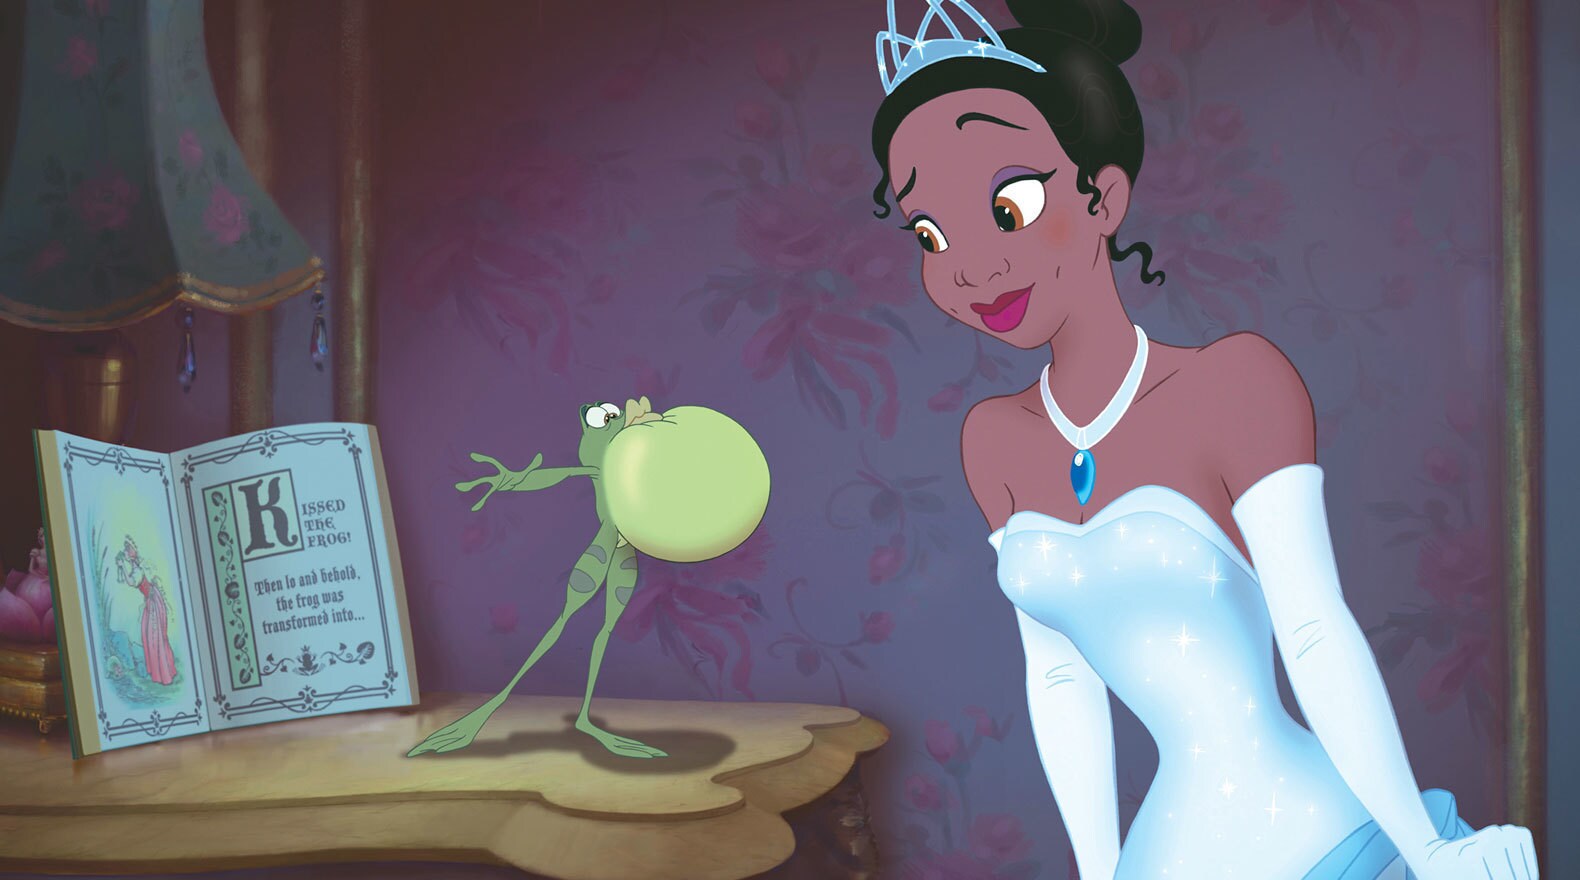 Naveen shows Tiana that perhaps their love is actually written in a storybook.